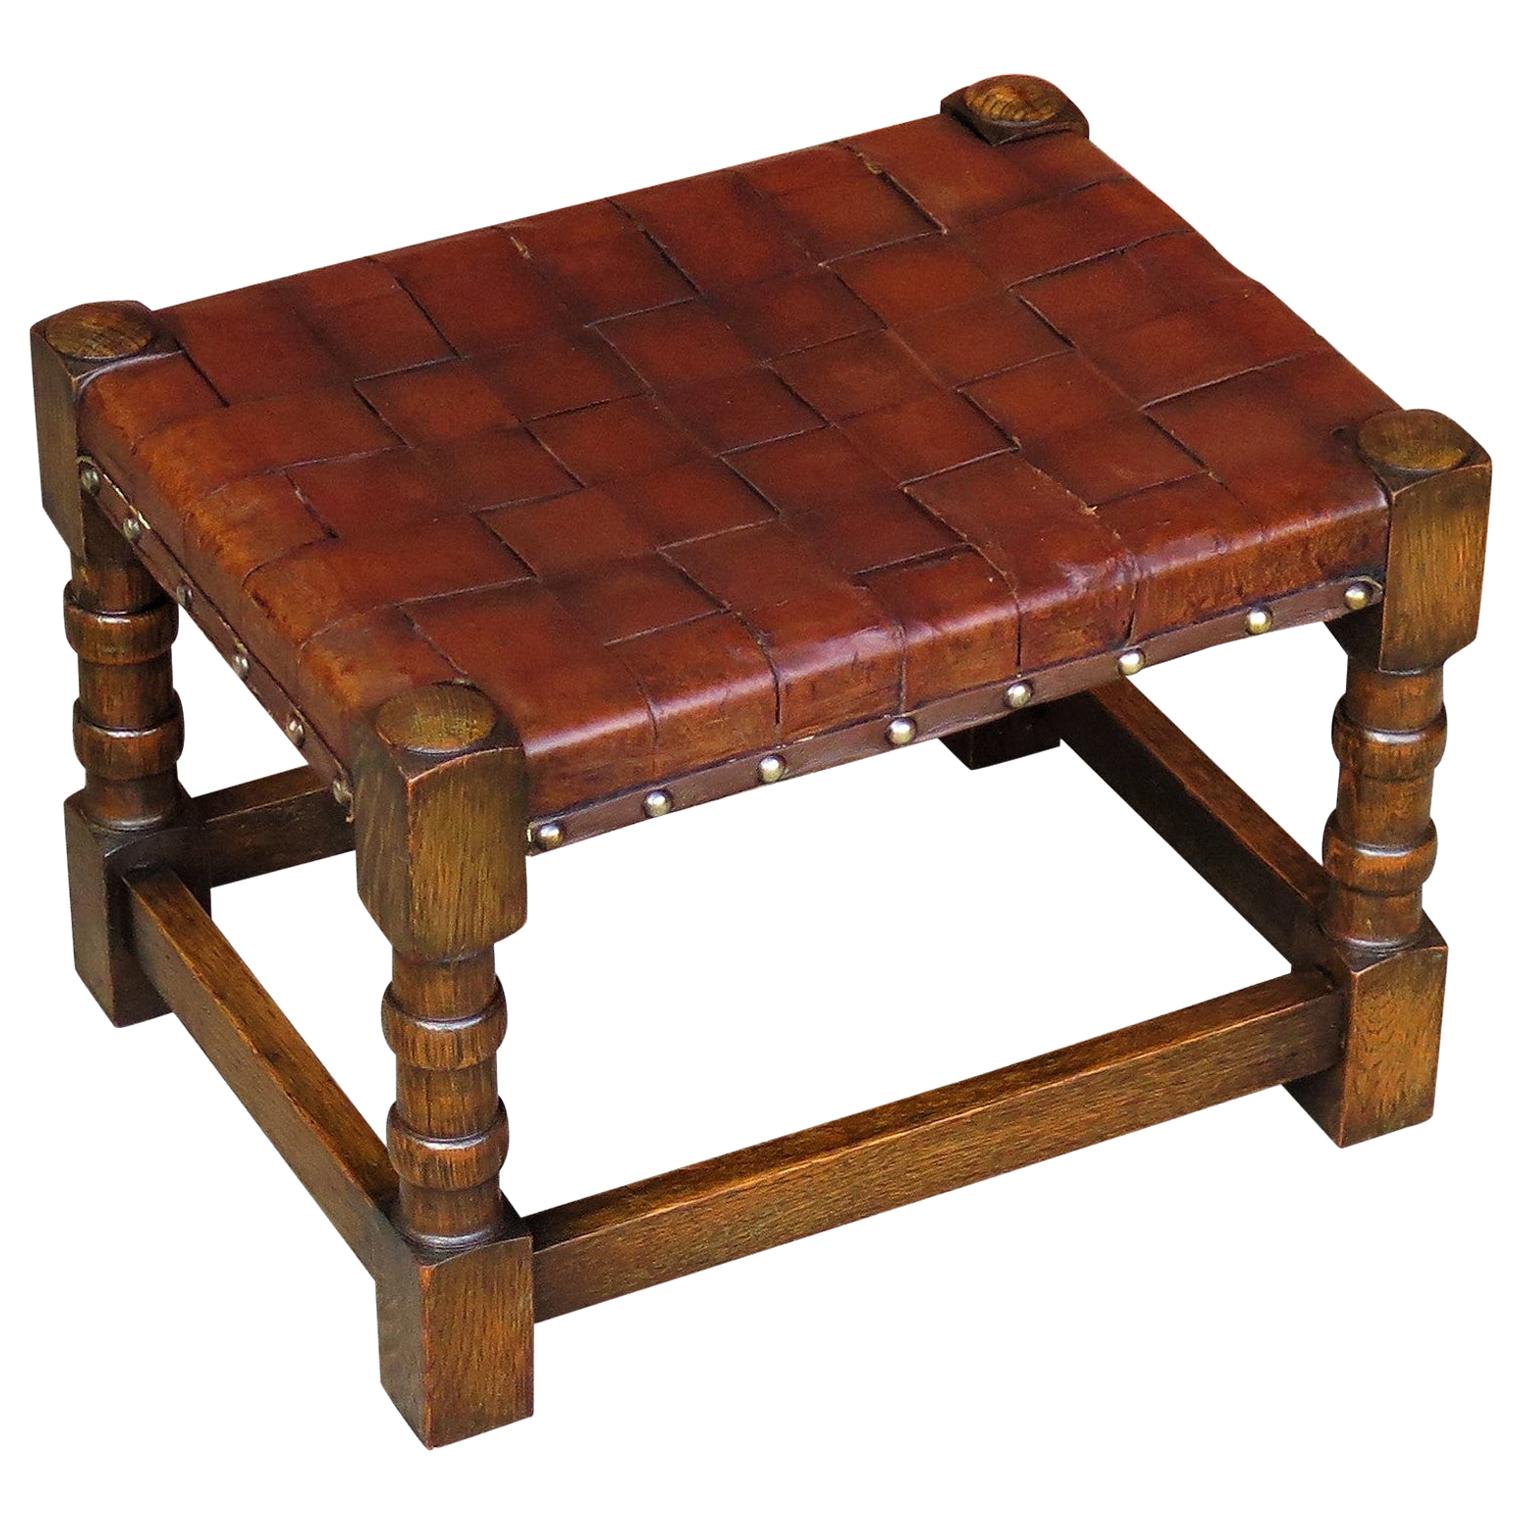 Handmade Oak Stool with Leather Strap Top, Arts & Crafts Late 19th Century